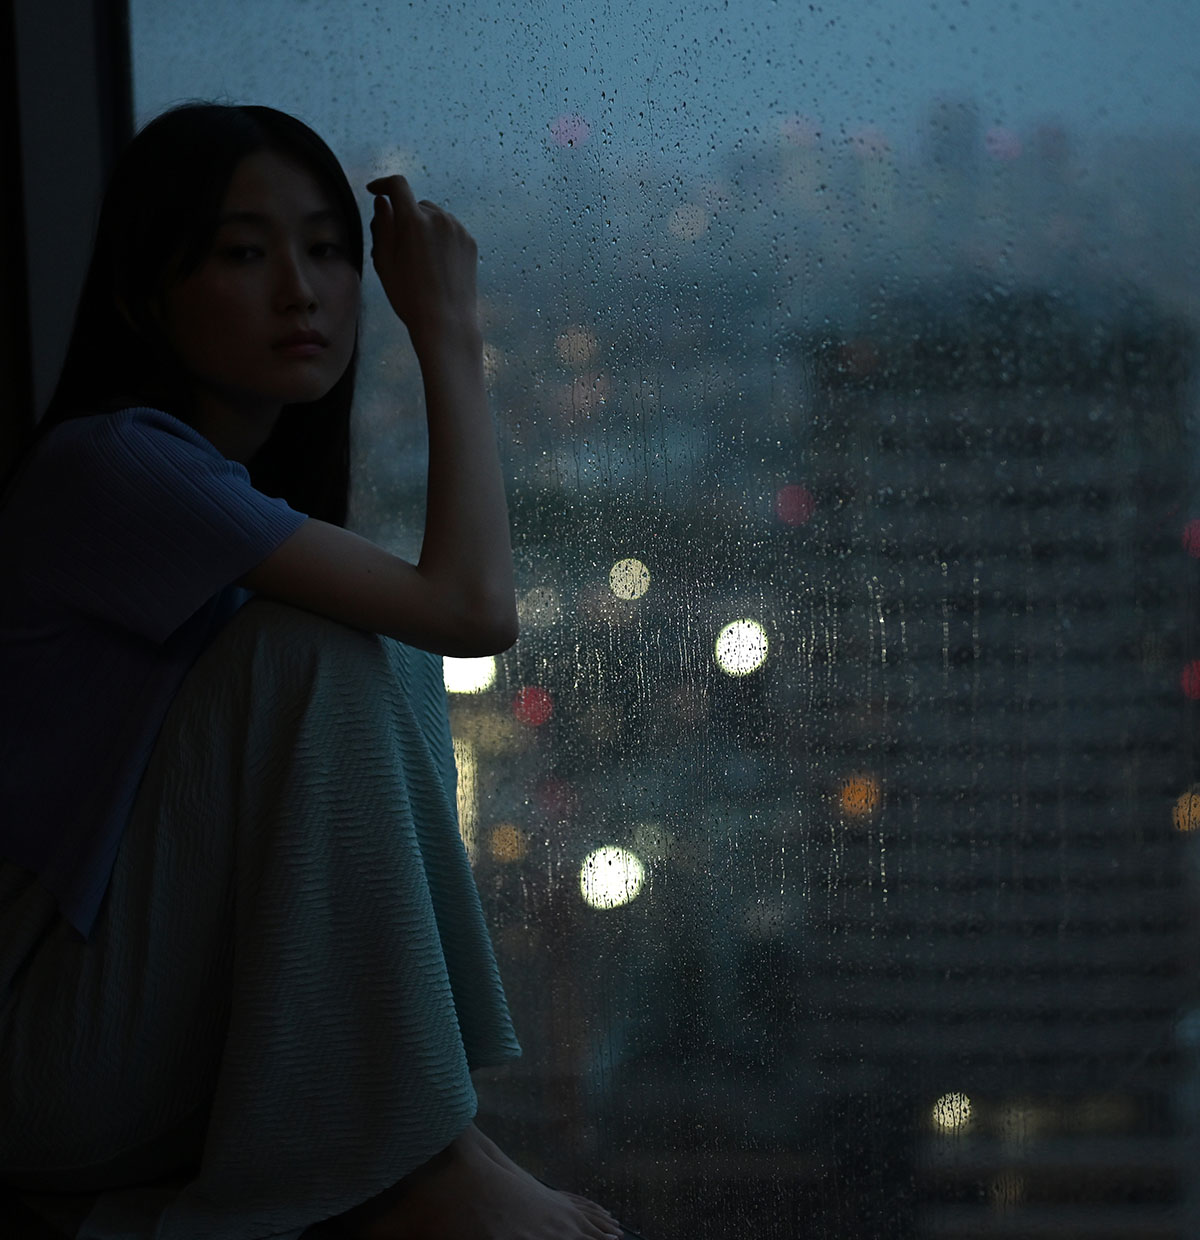 Photo of a female model in low light in front of a window with rain drops on it, taken with the Z f camera